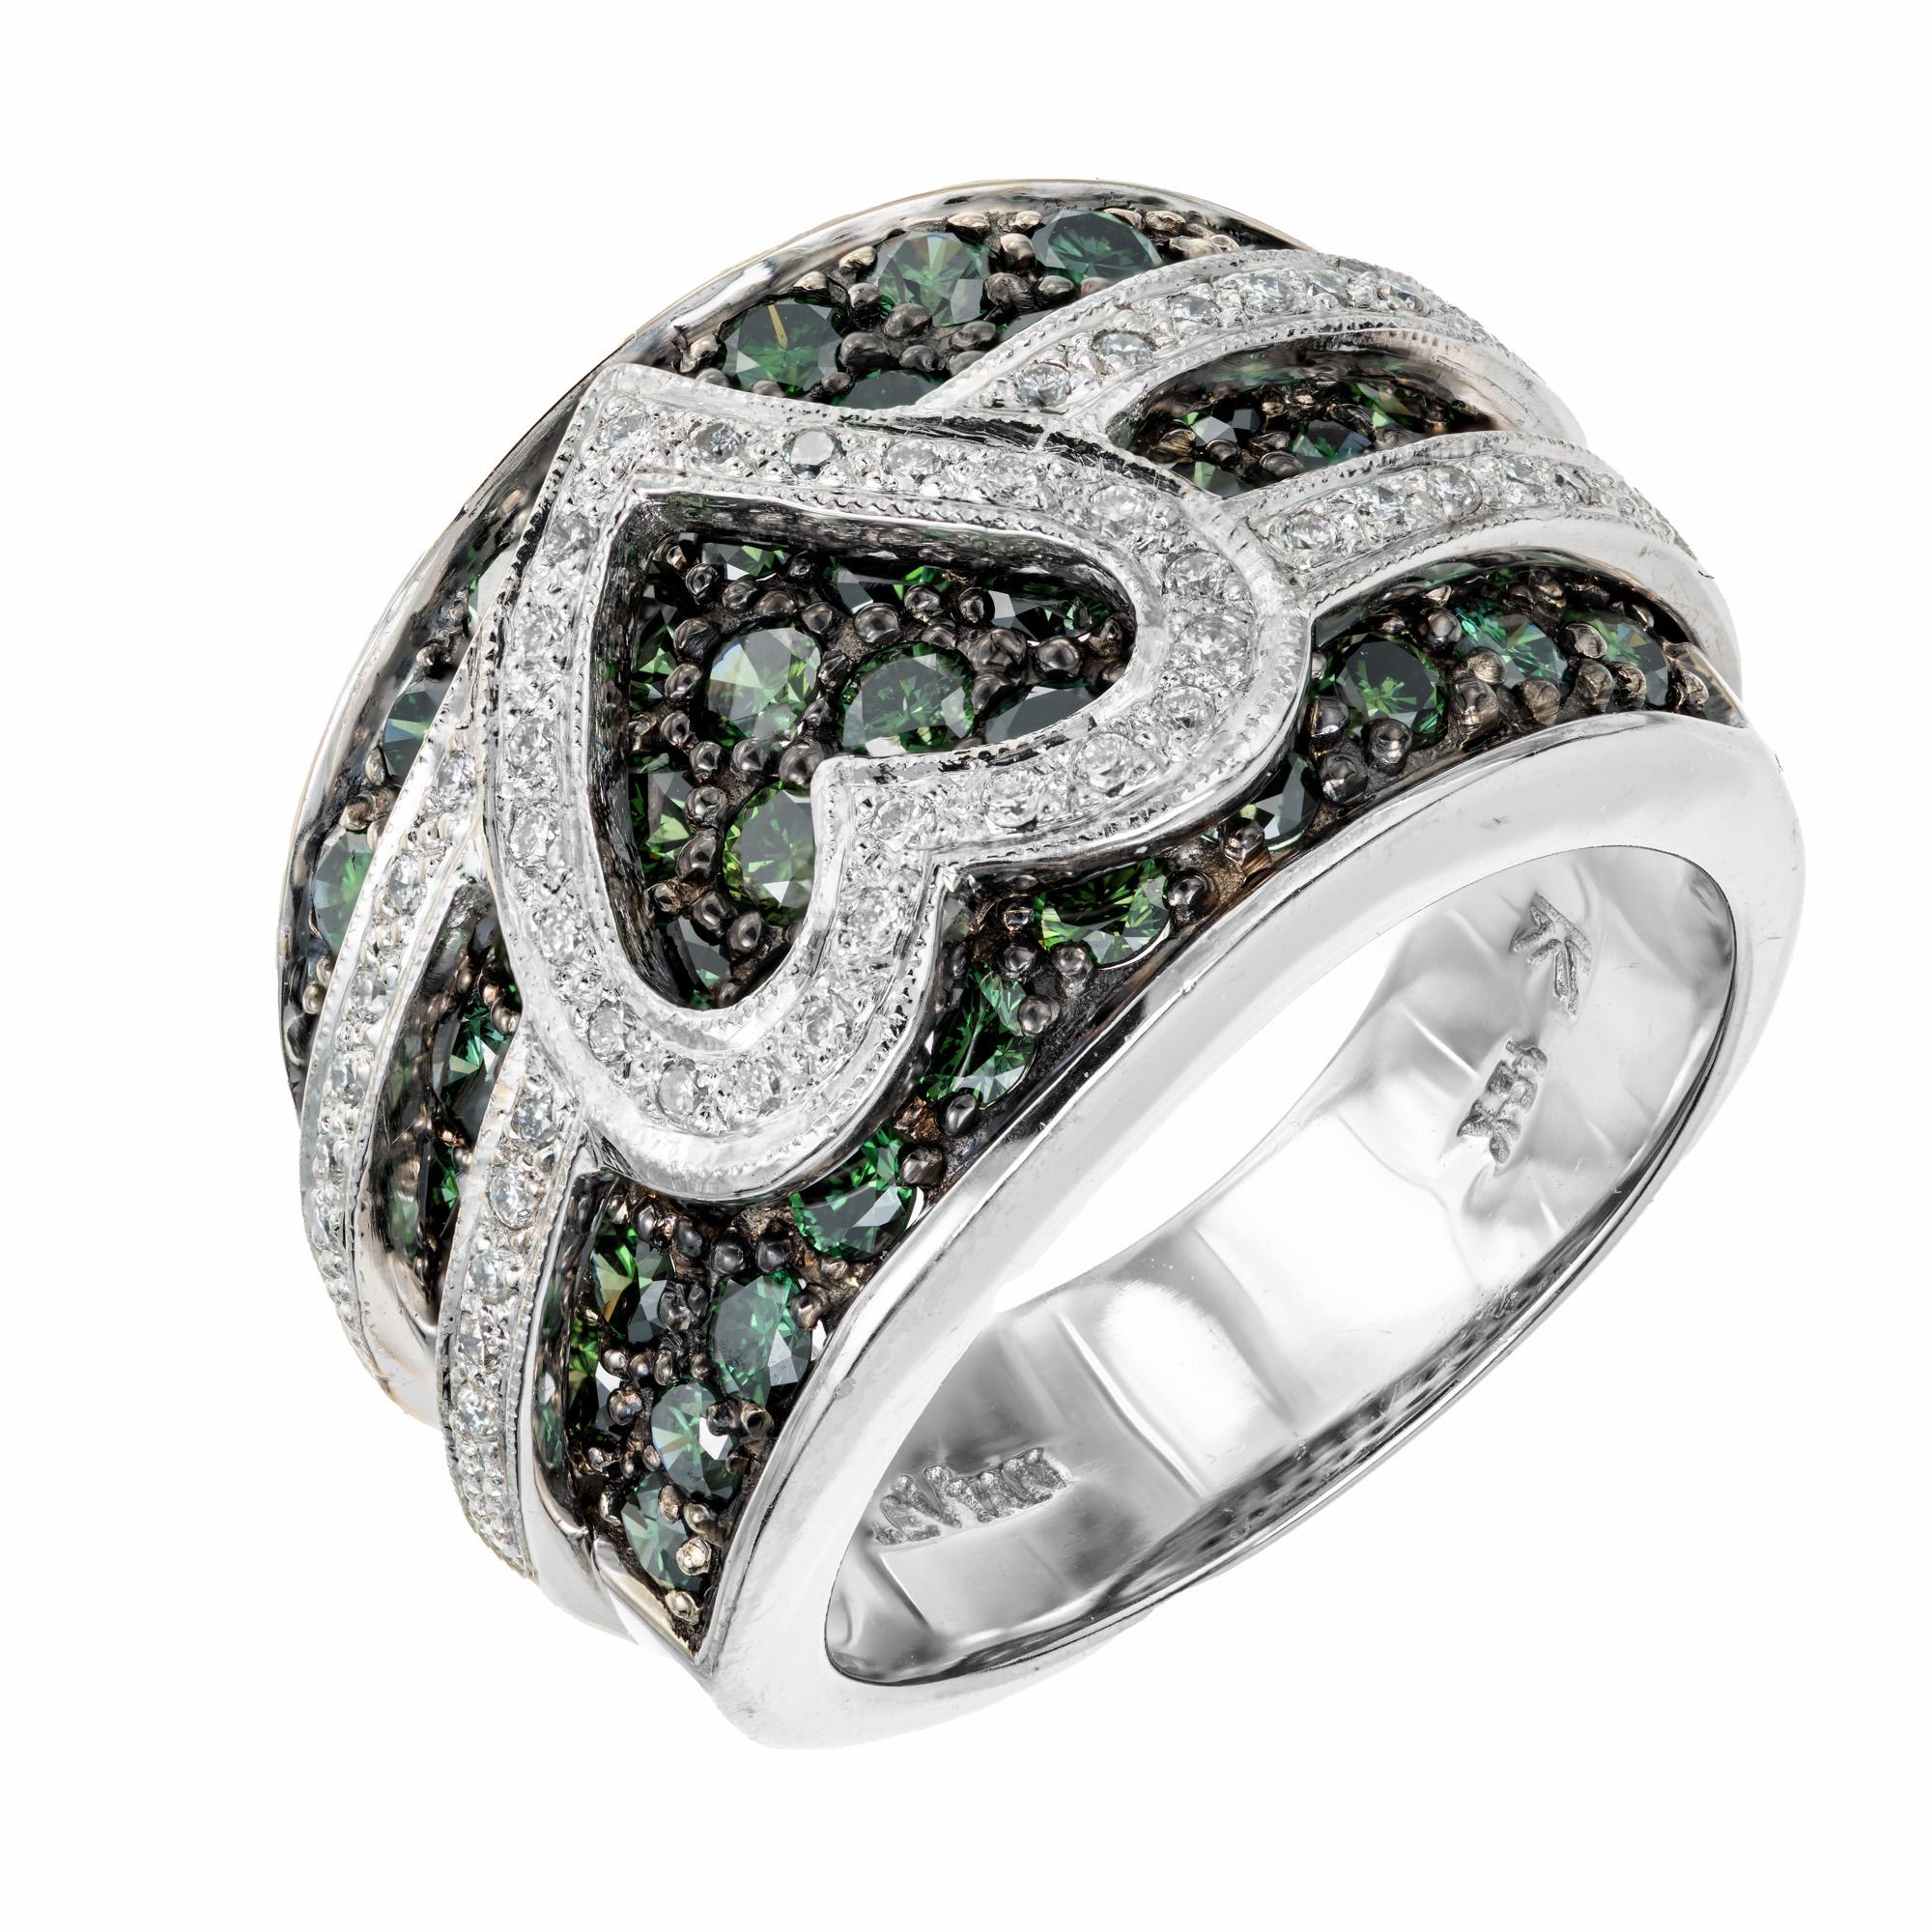 Blue green diamond cocktail ring by Le Vian. Know for their famous distinct, colorful and bold designs, this 18k white gold wide band ring boasts a cluster of 56 round blue green diamonds, approximately totaling 2.50cts., complemented with a heart